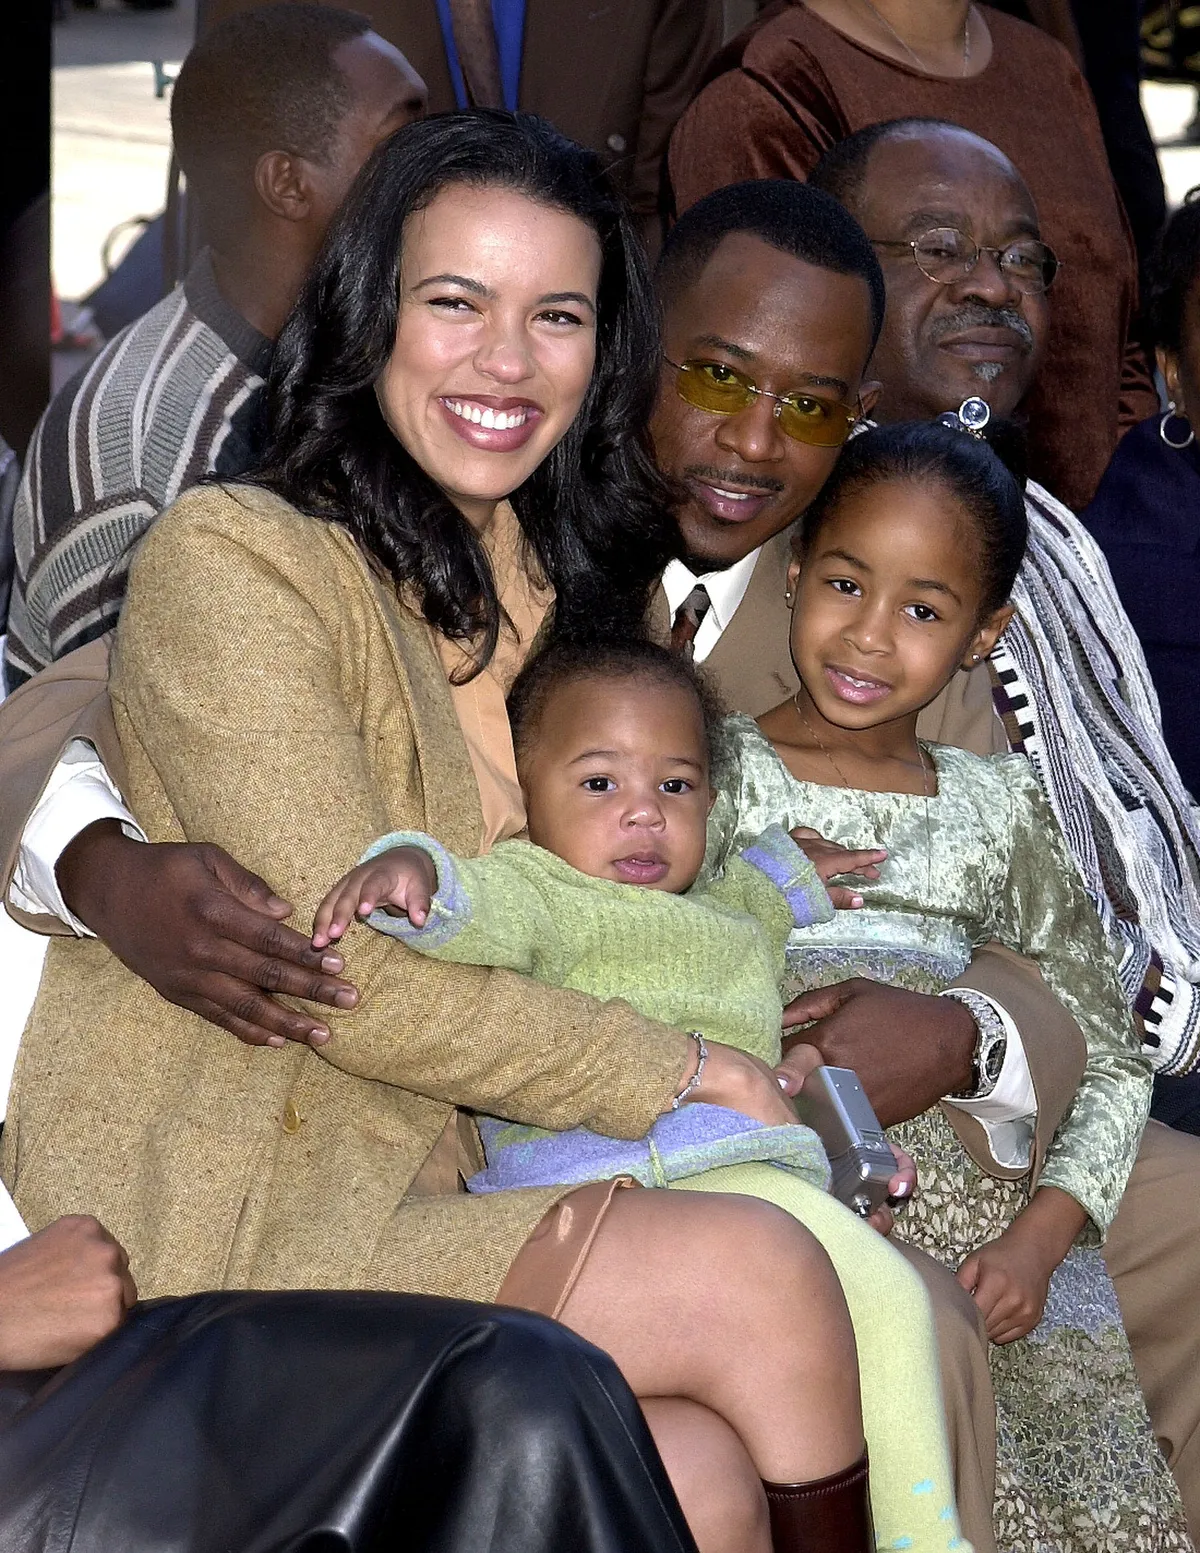 Shamicka, Martin, Iyanna and Jasmin Lawrence at the Mann's Chinese Theatre in Hollywood, California November 19, 2001 | Photo: Getty Images